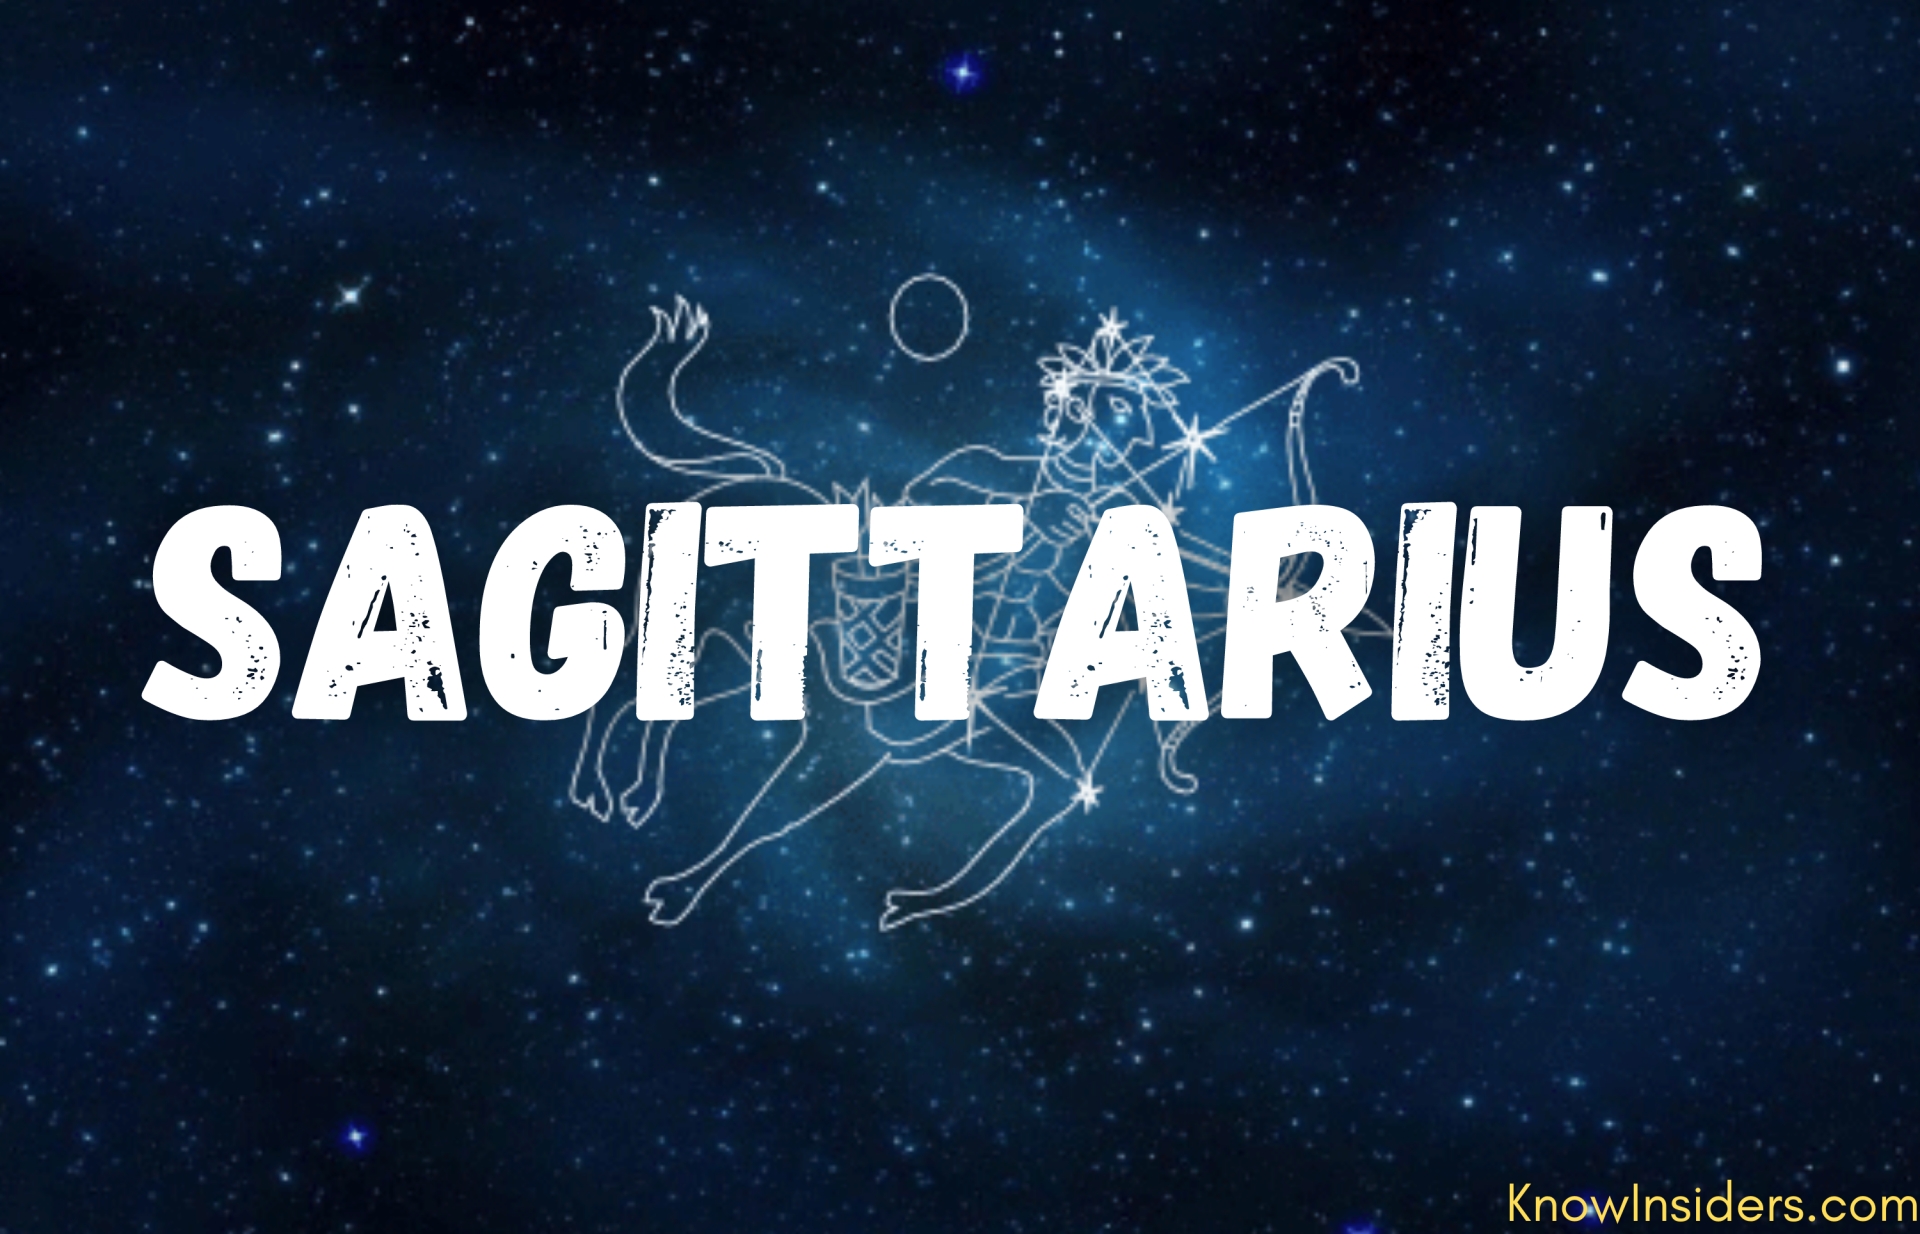 SAGITTARIUS Horoscope September 2021 - Monthly Predictions for Love, Health, Career and Money